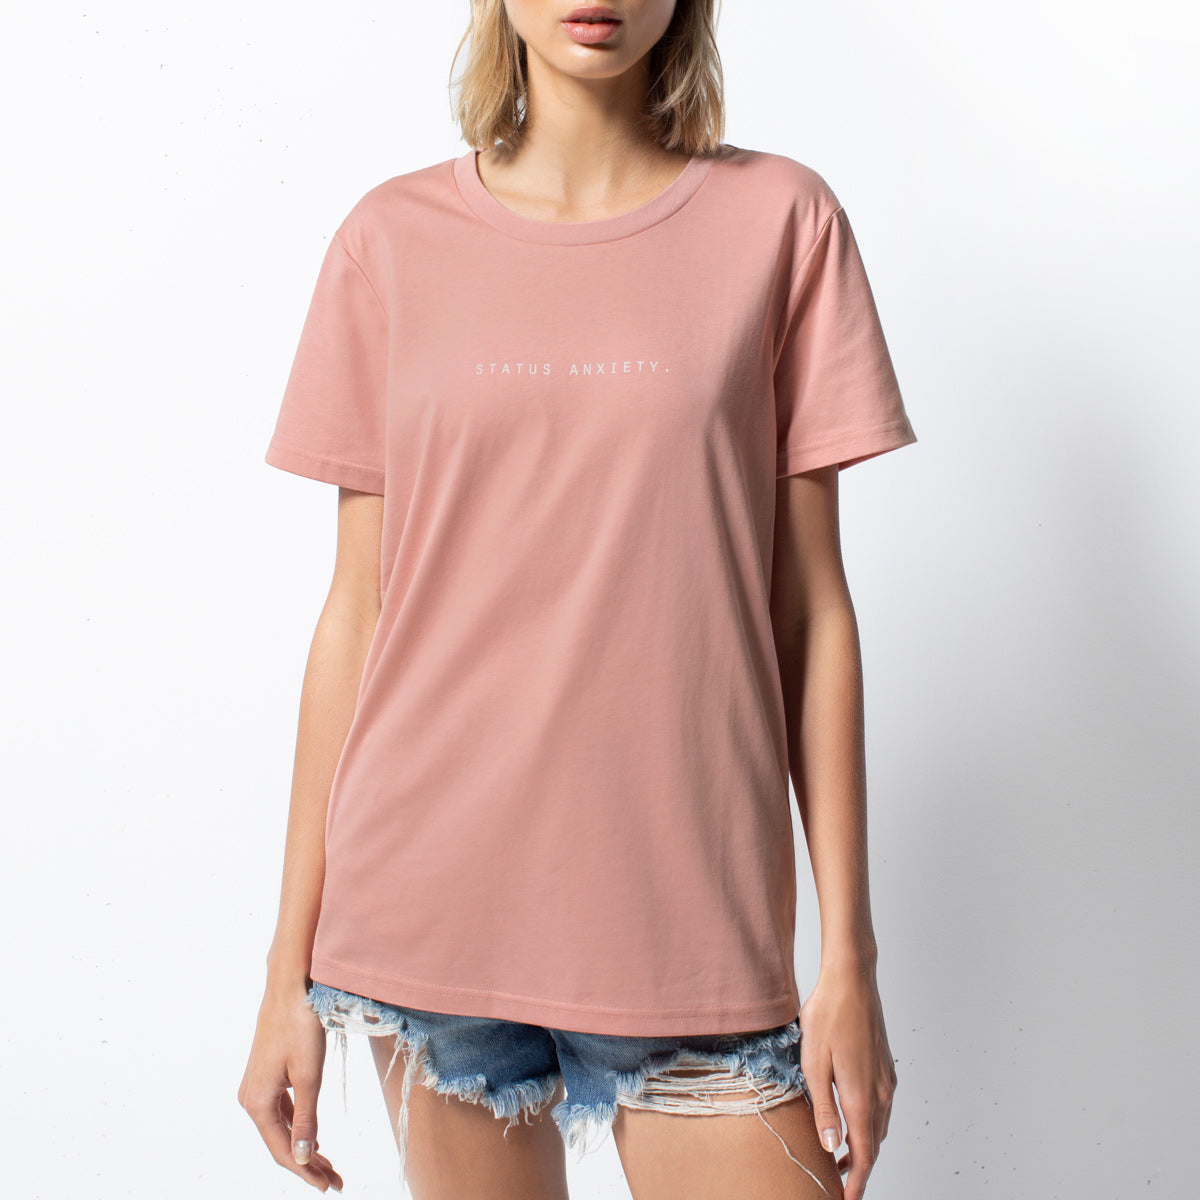 Think It Over Women's Tee - Rose